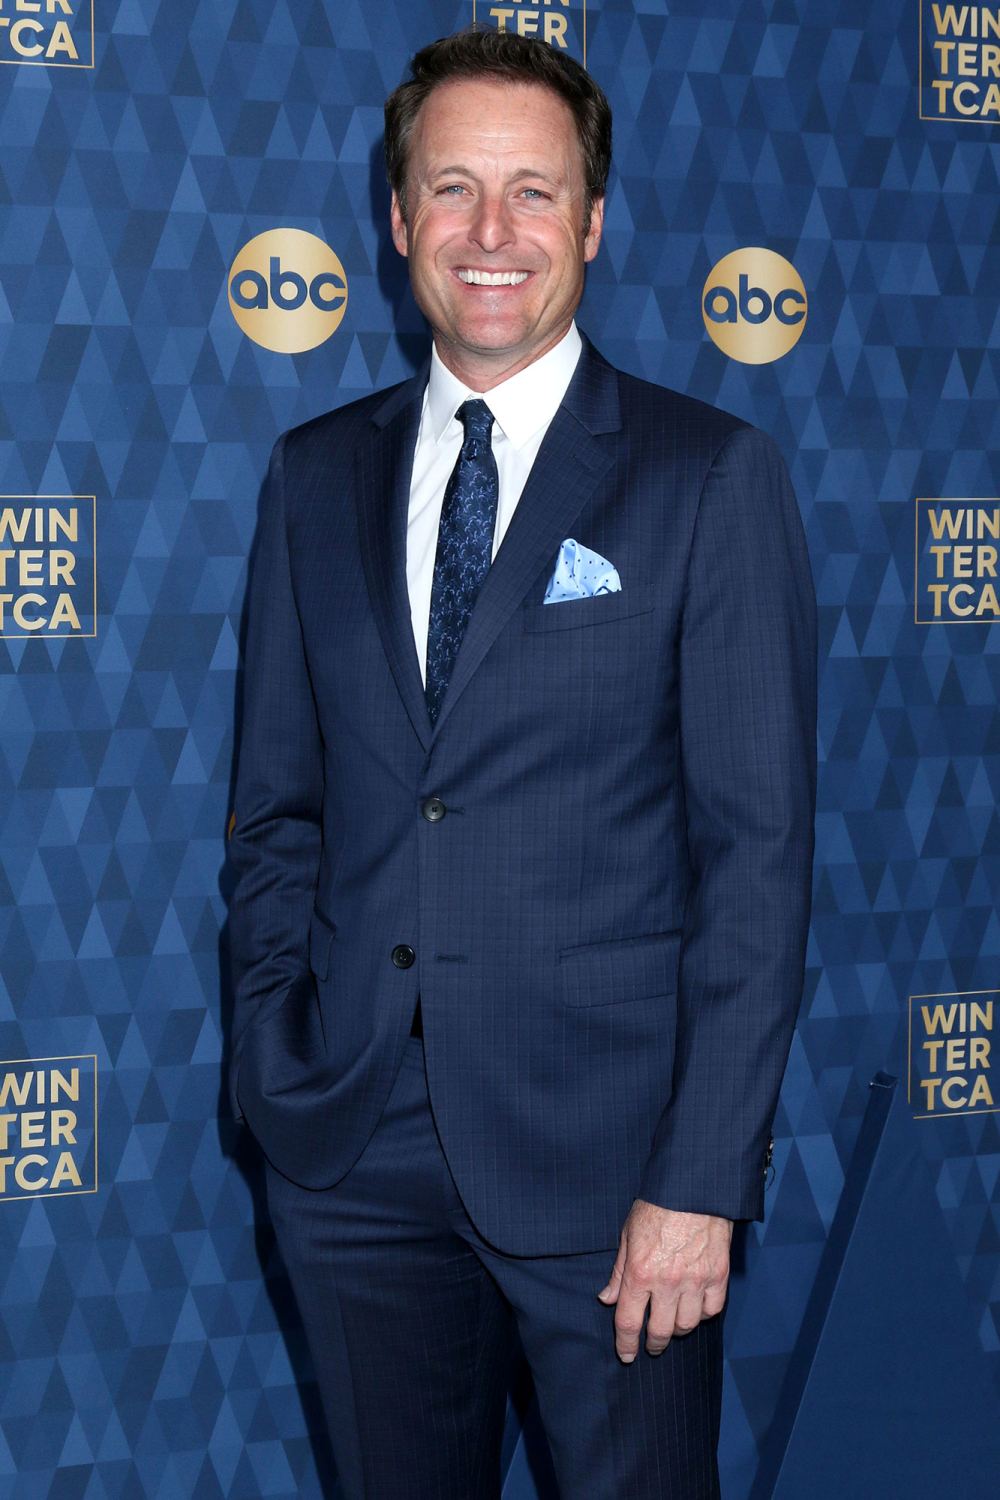 Crest Reconsidering Chris Harrison as Spokesperson After Racism Discussion